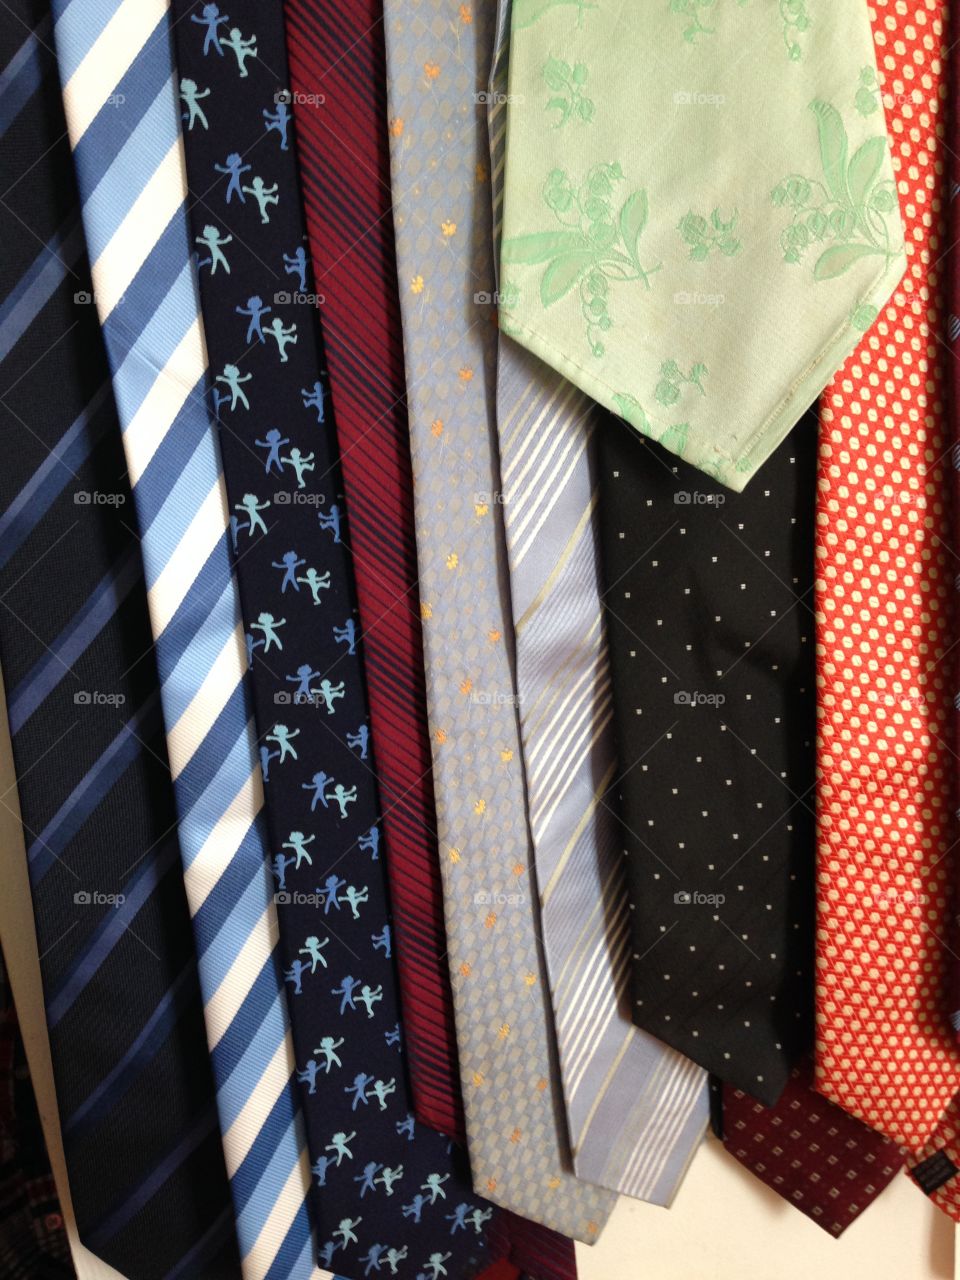 My husband's ties collection 